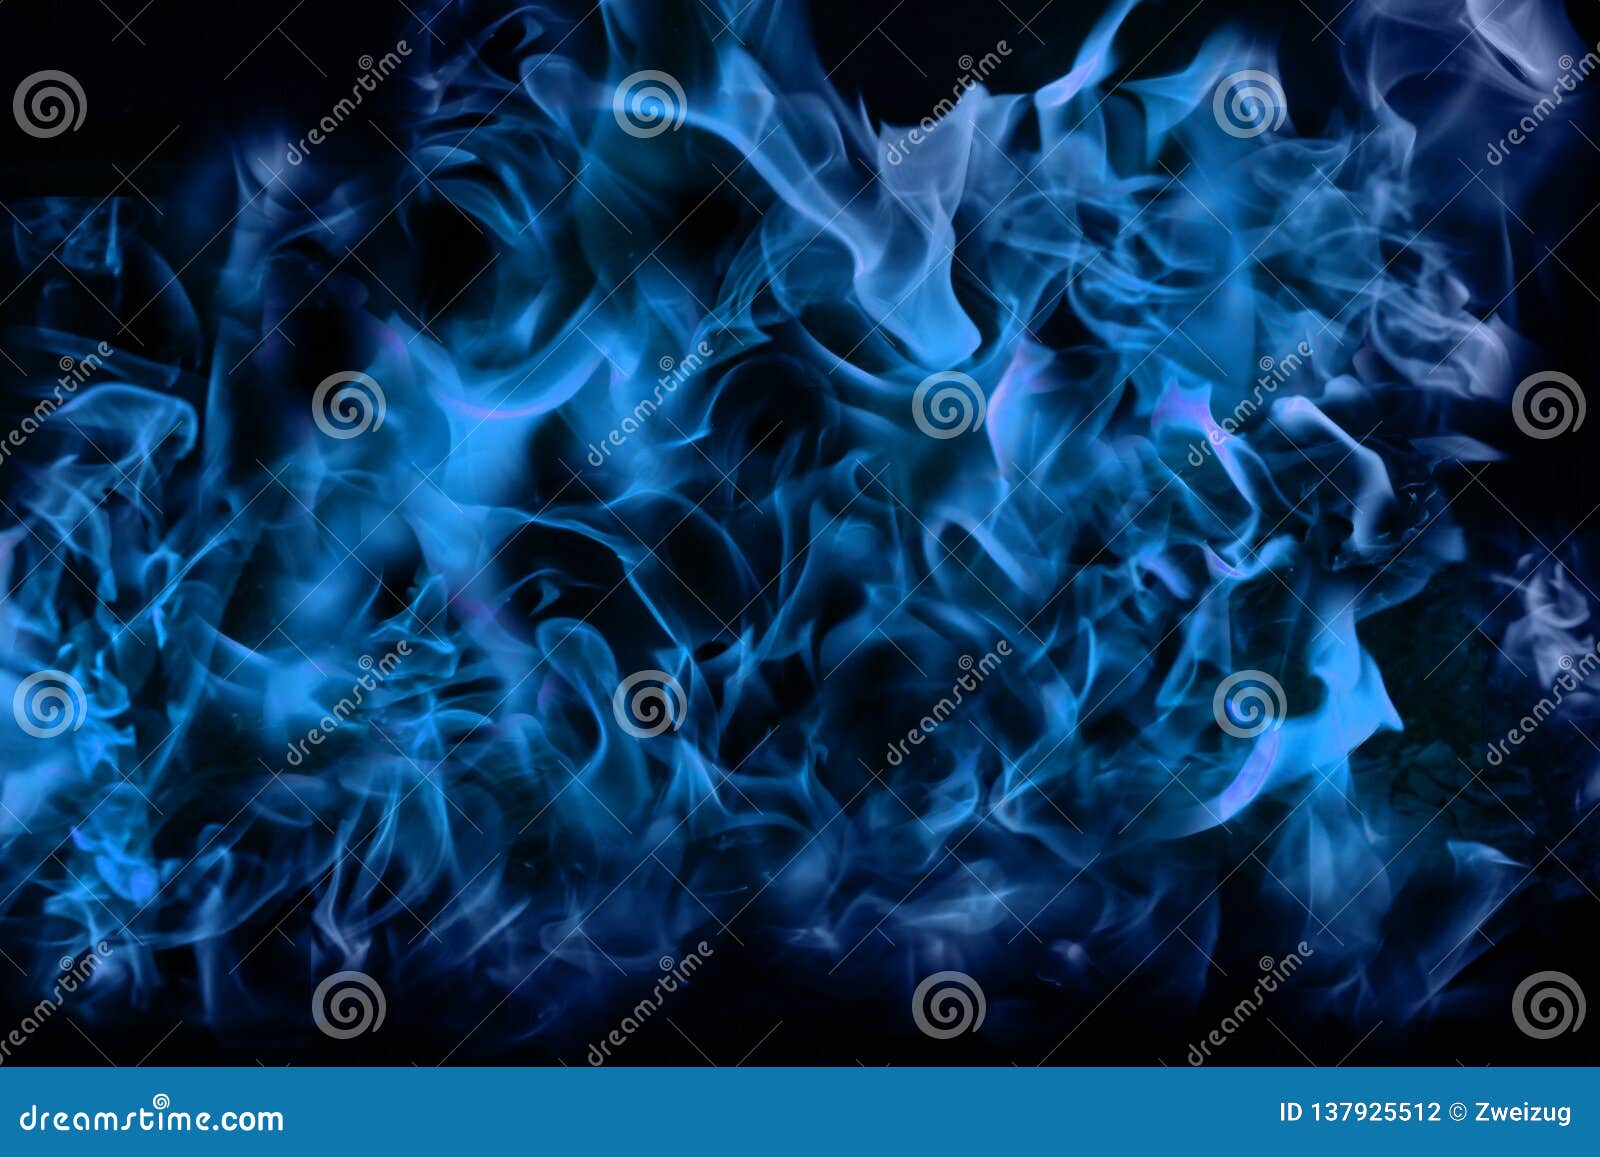 Blue Flame Fire Conceptual Abstract Texture Background Stock Photo - Image  of display, abstract: 137925512